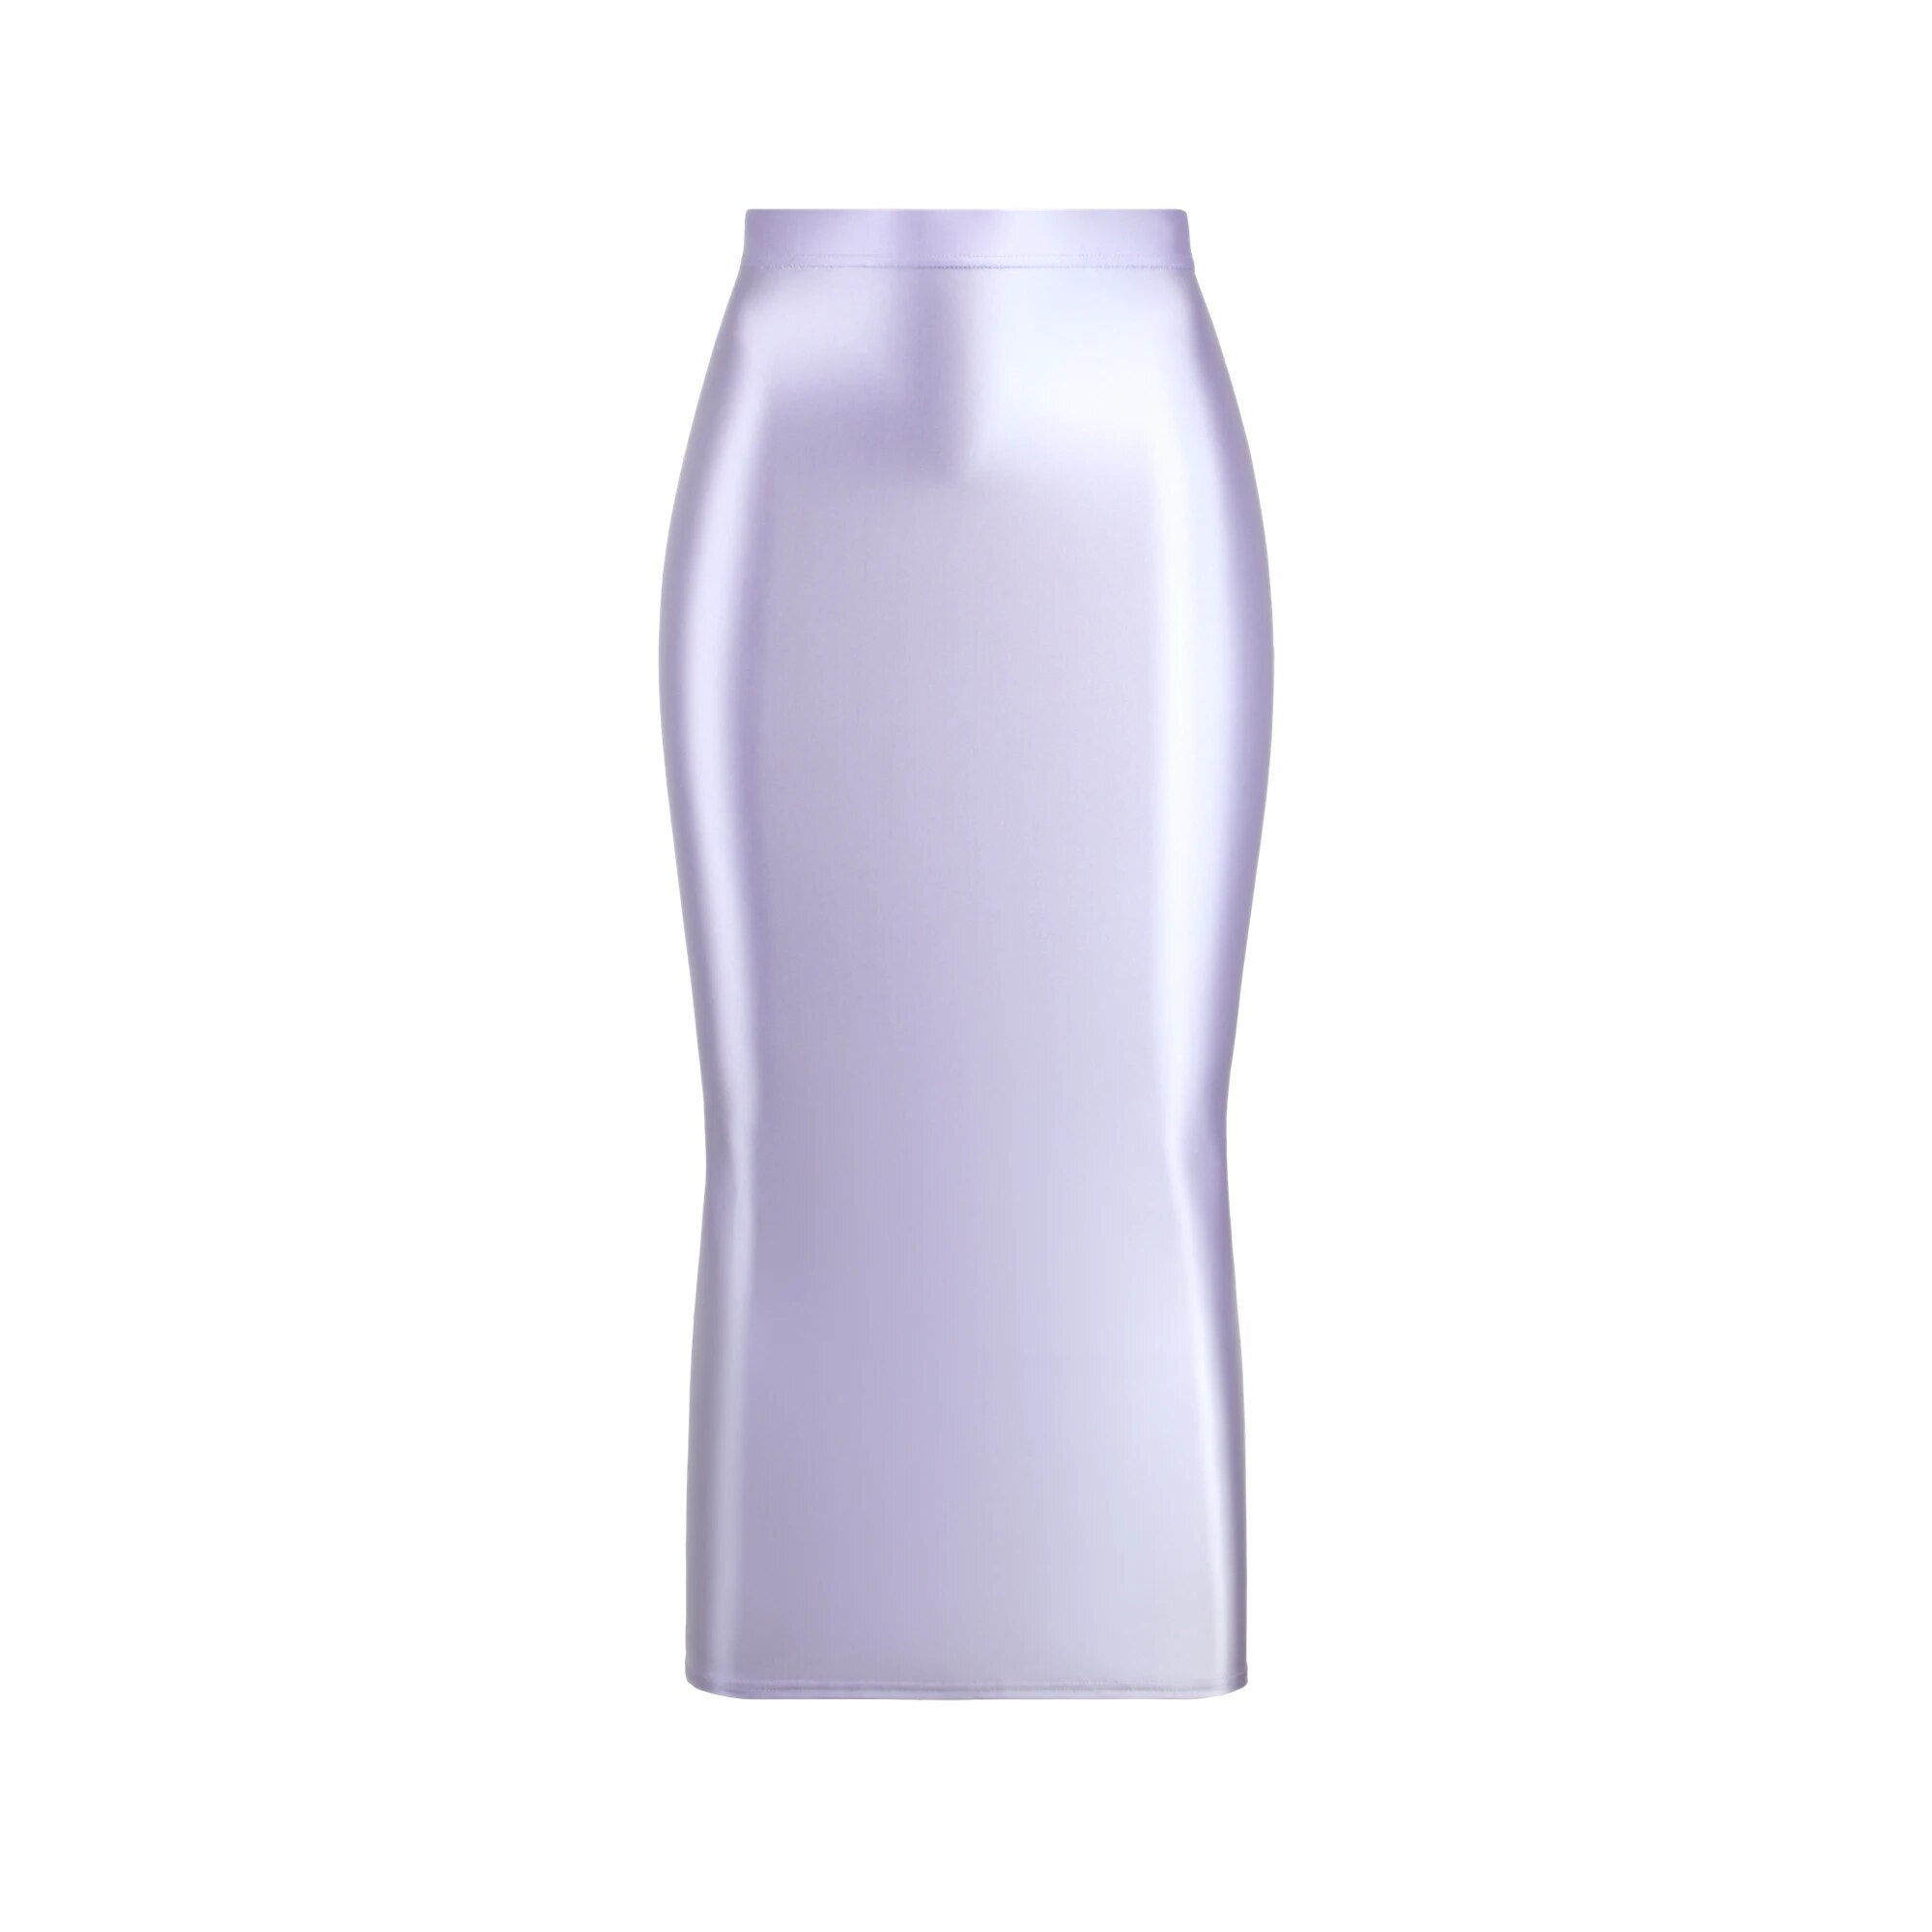 A lavender colored glossy maxi skirt featuring a elastic waistband.